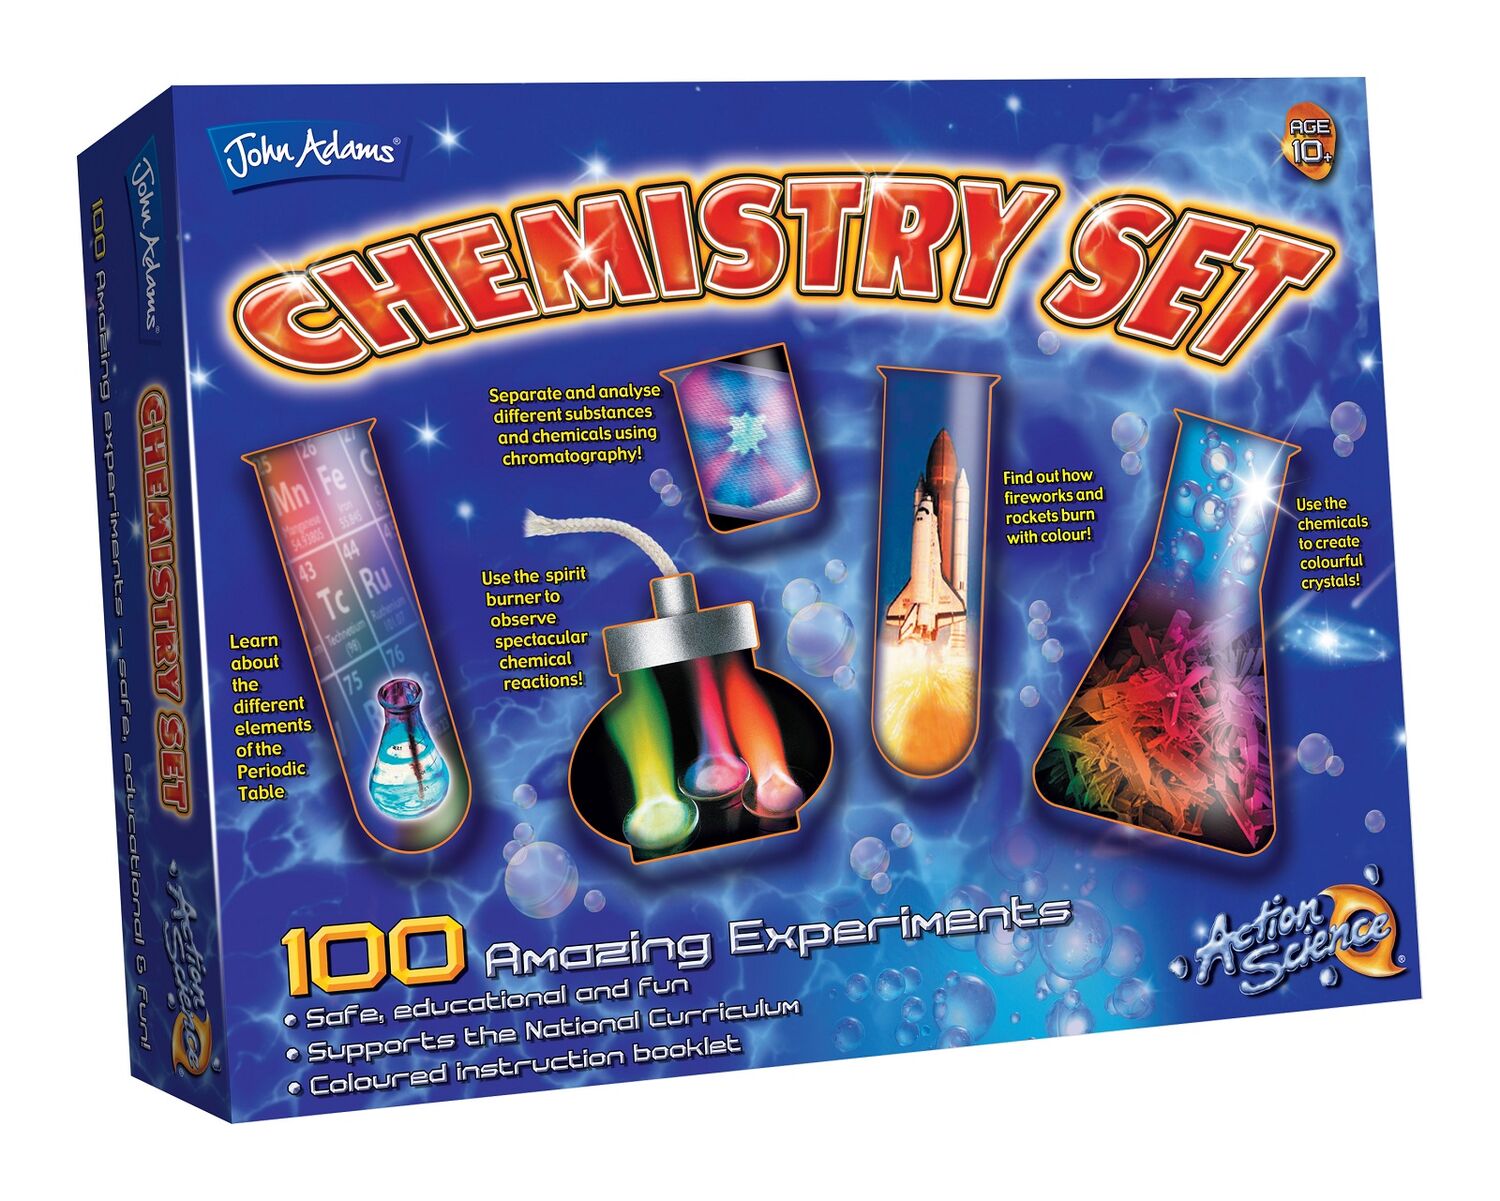 NEW CHEMISTRY KIT SET WITH 100 EXPERIMENTS ACTION SCIENCE BY JOHN  ADAMS 